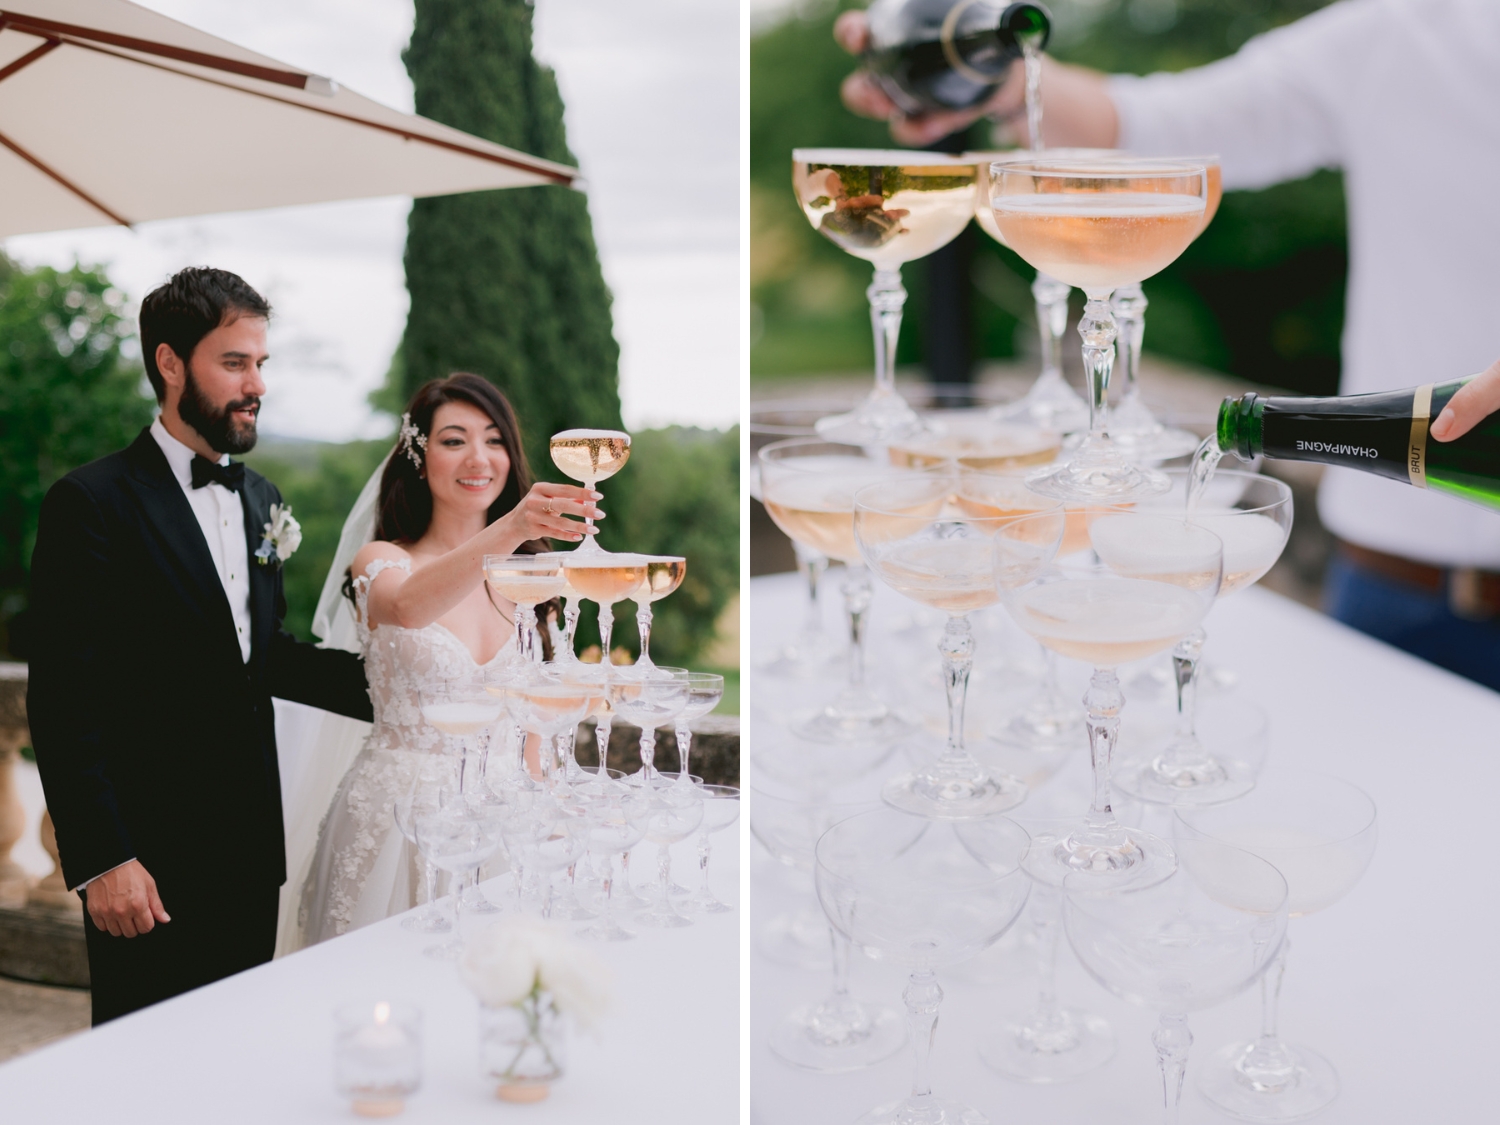 Spring Wedding at Chateau Martinay in Provence, France